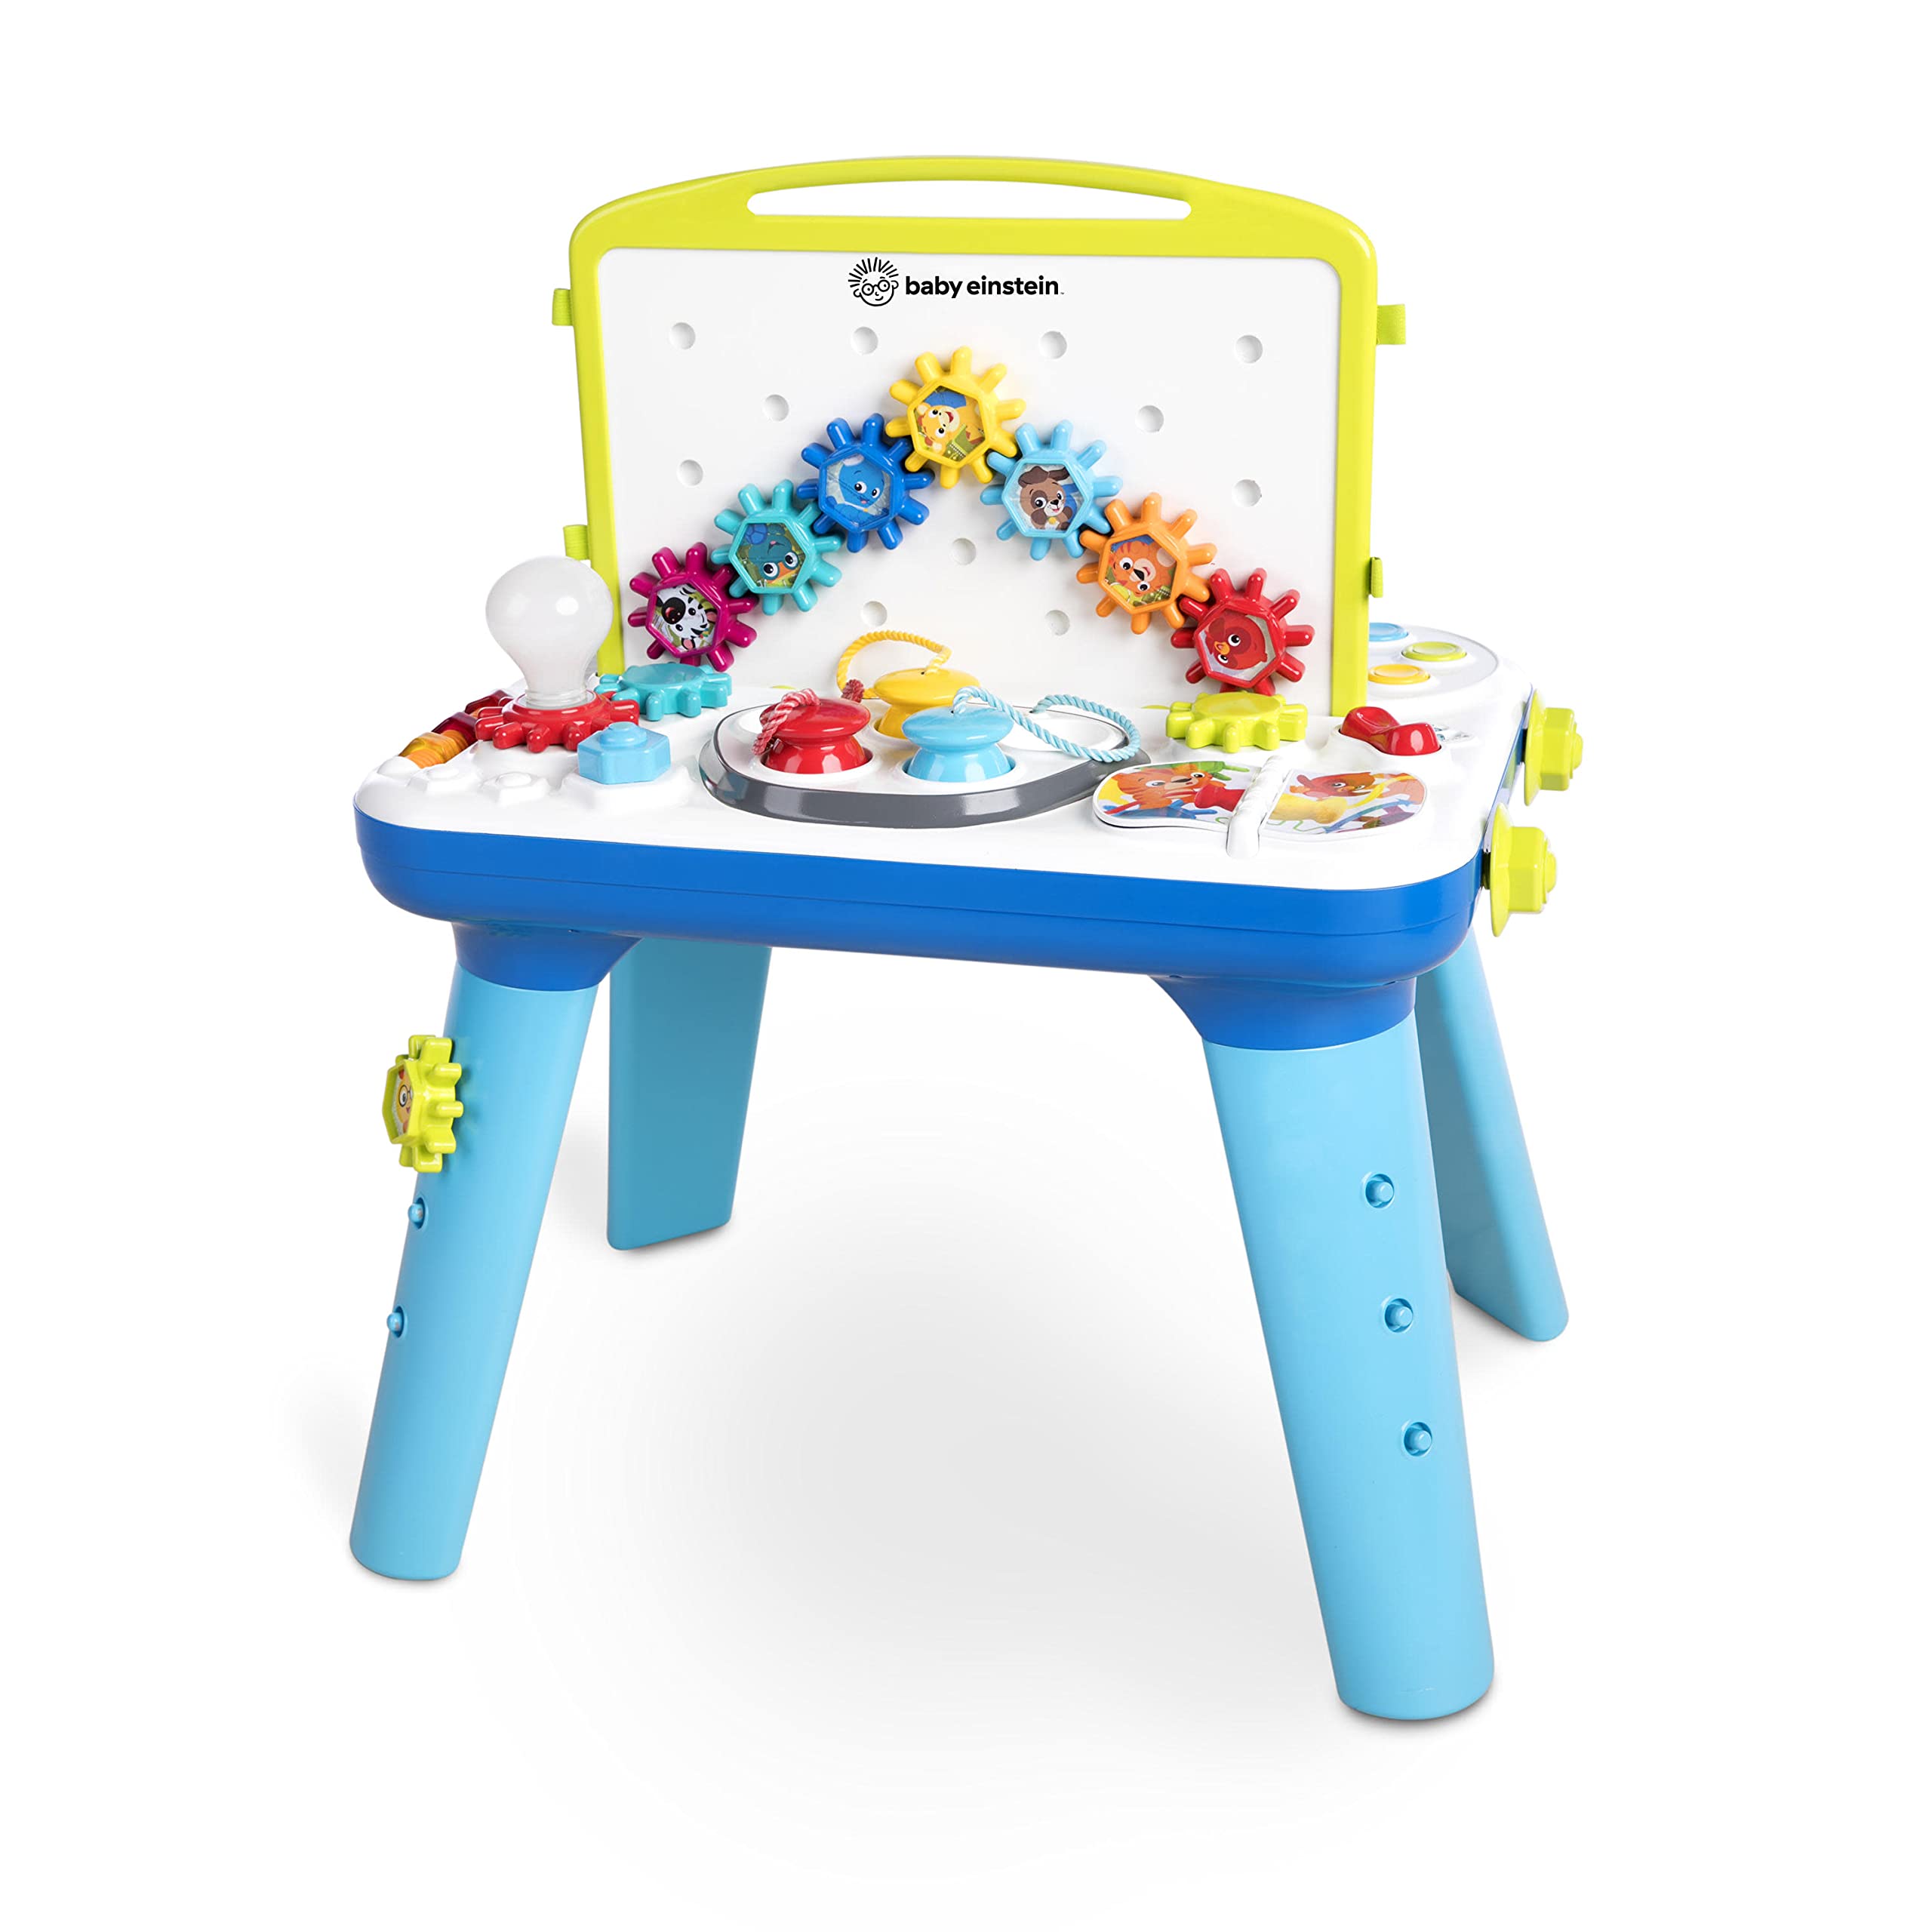 Baby Einstein Be Curious Tinker Table Activity Center Toy $29.72 + Free Shipping w/ Prime or on $35+